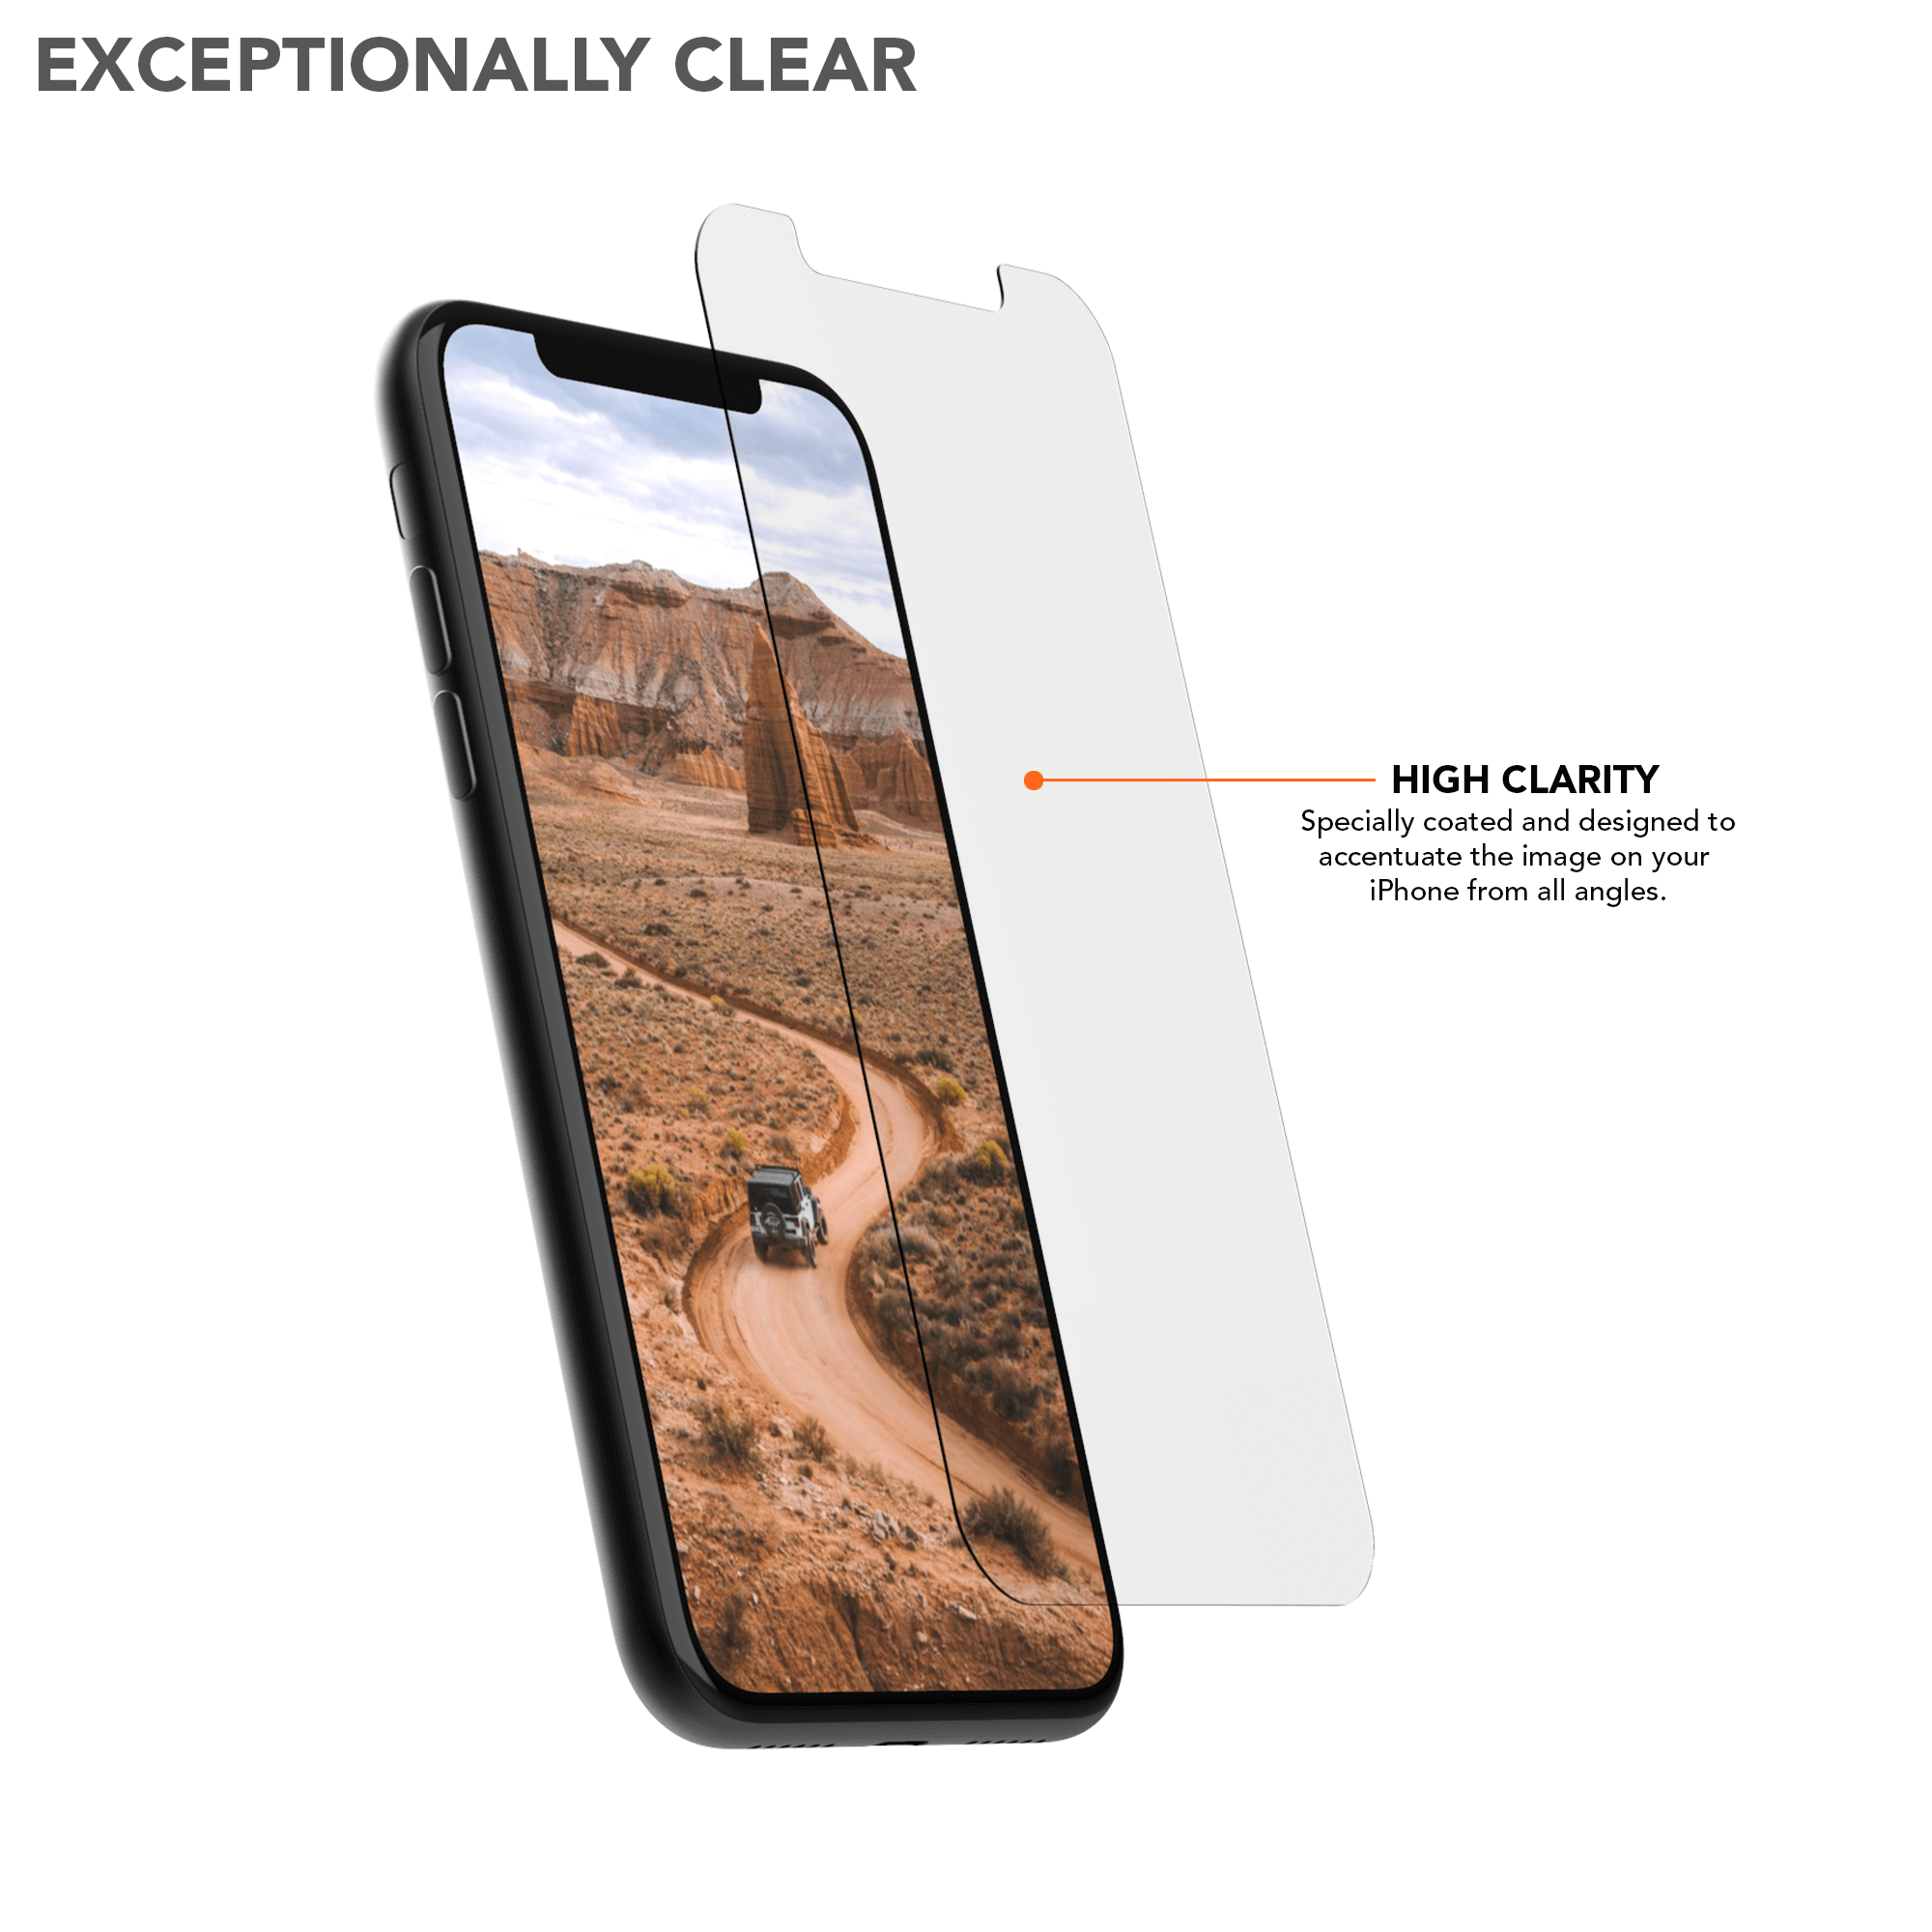 iphone clear glass